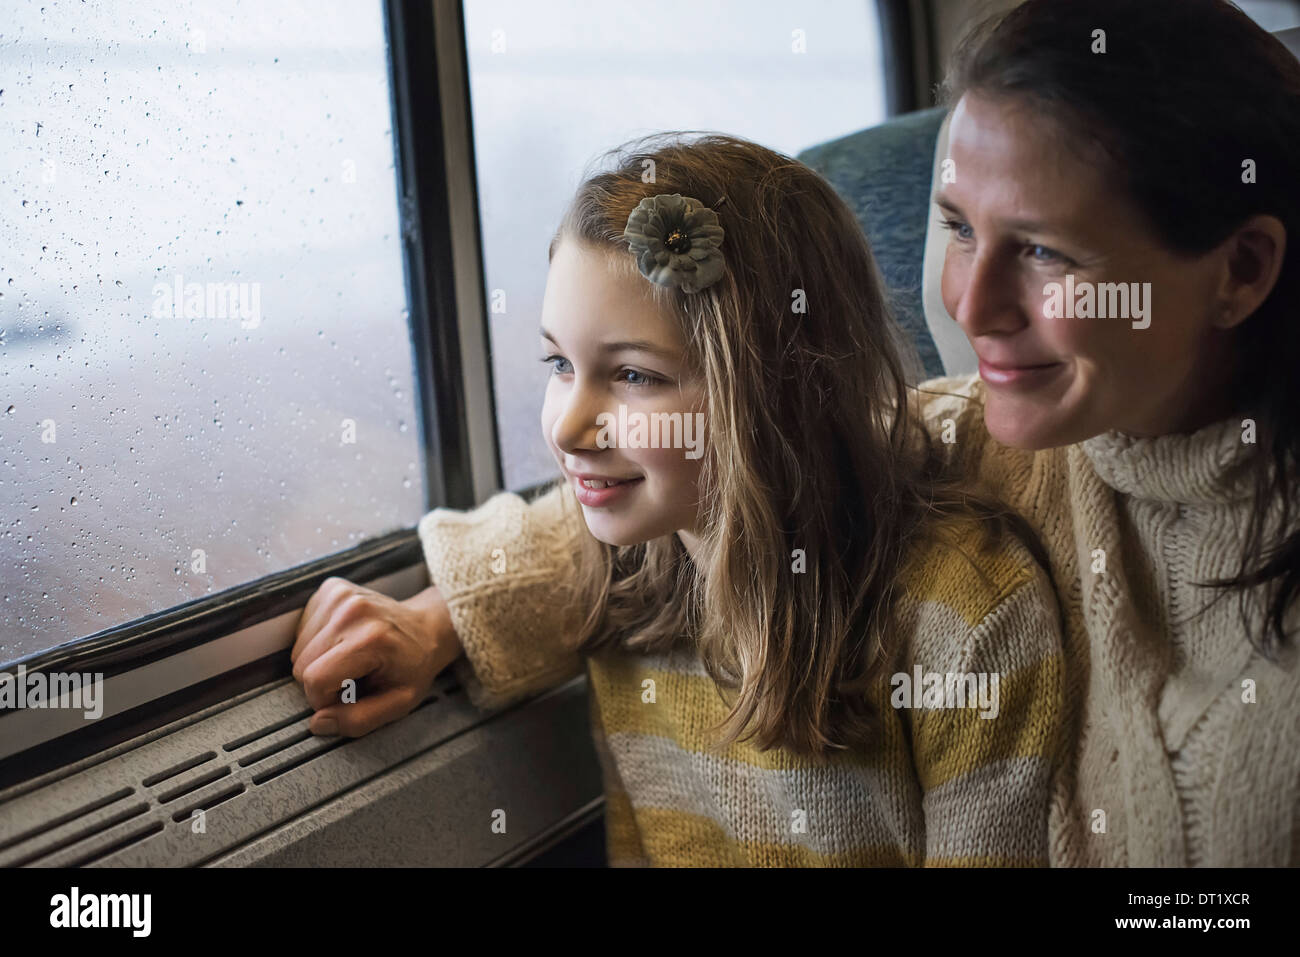 A man and a young girl sitting beside the window in a train carriage looking out at the countryside Smiling in excitement Stock Photo